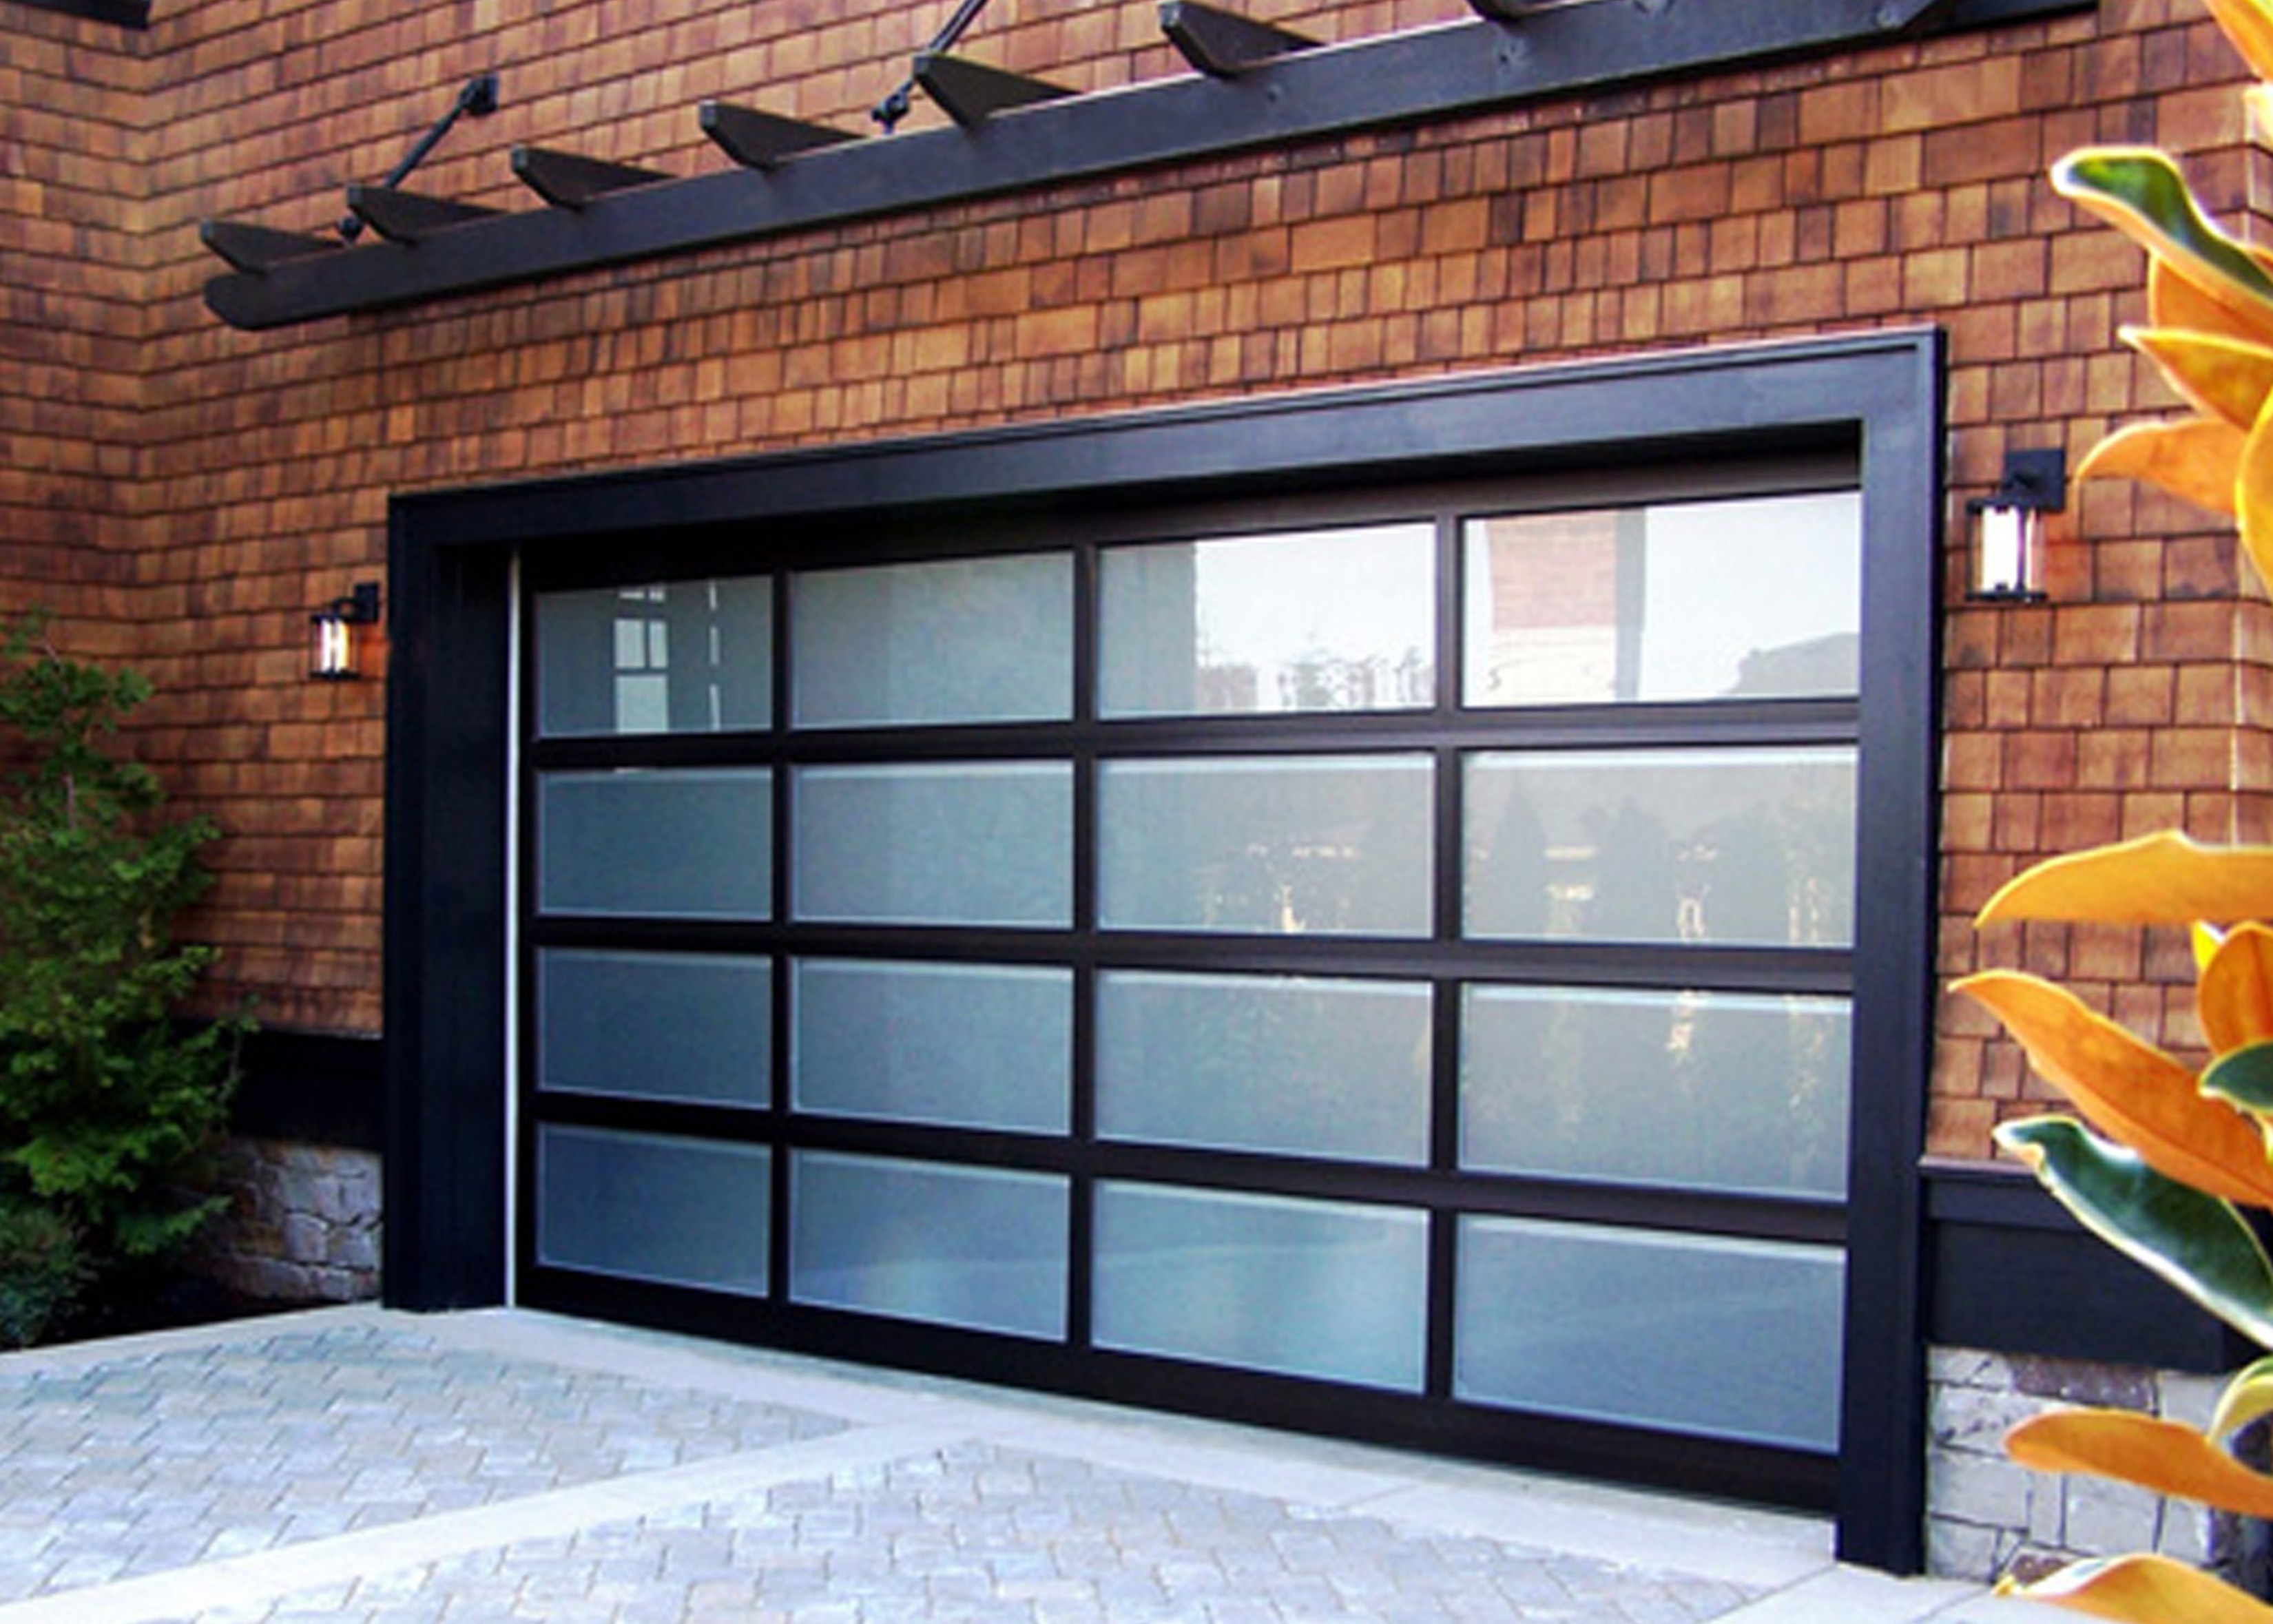 Knowing It All About Garage Doors